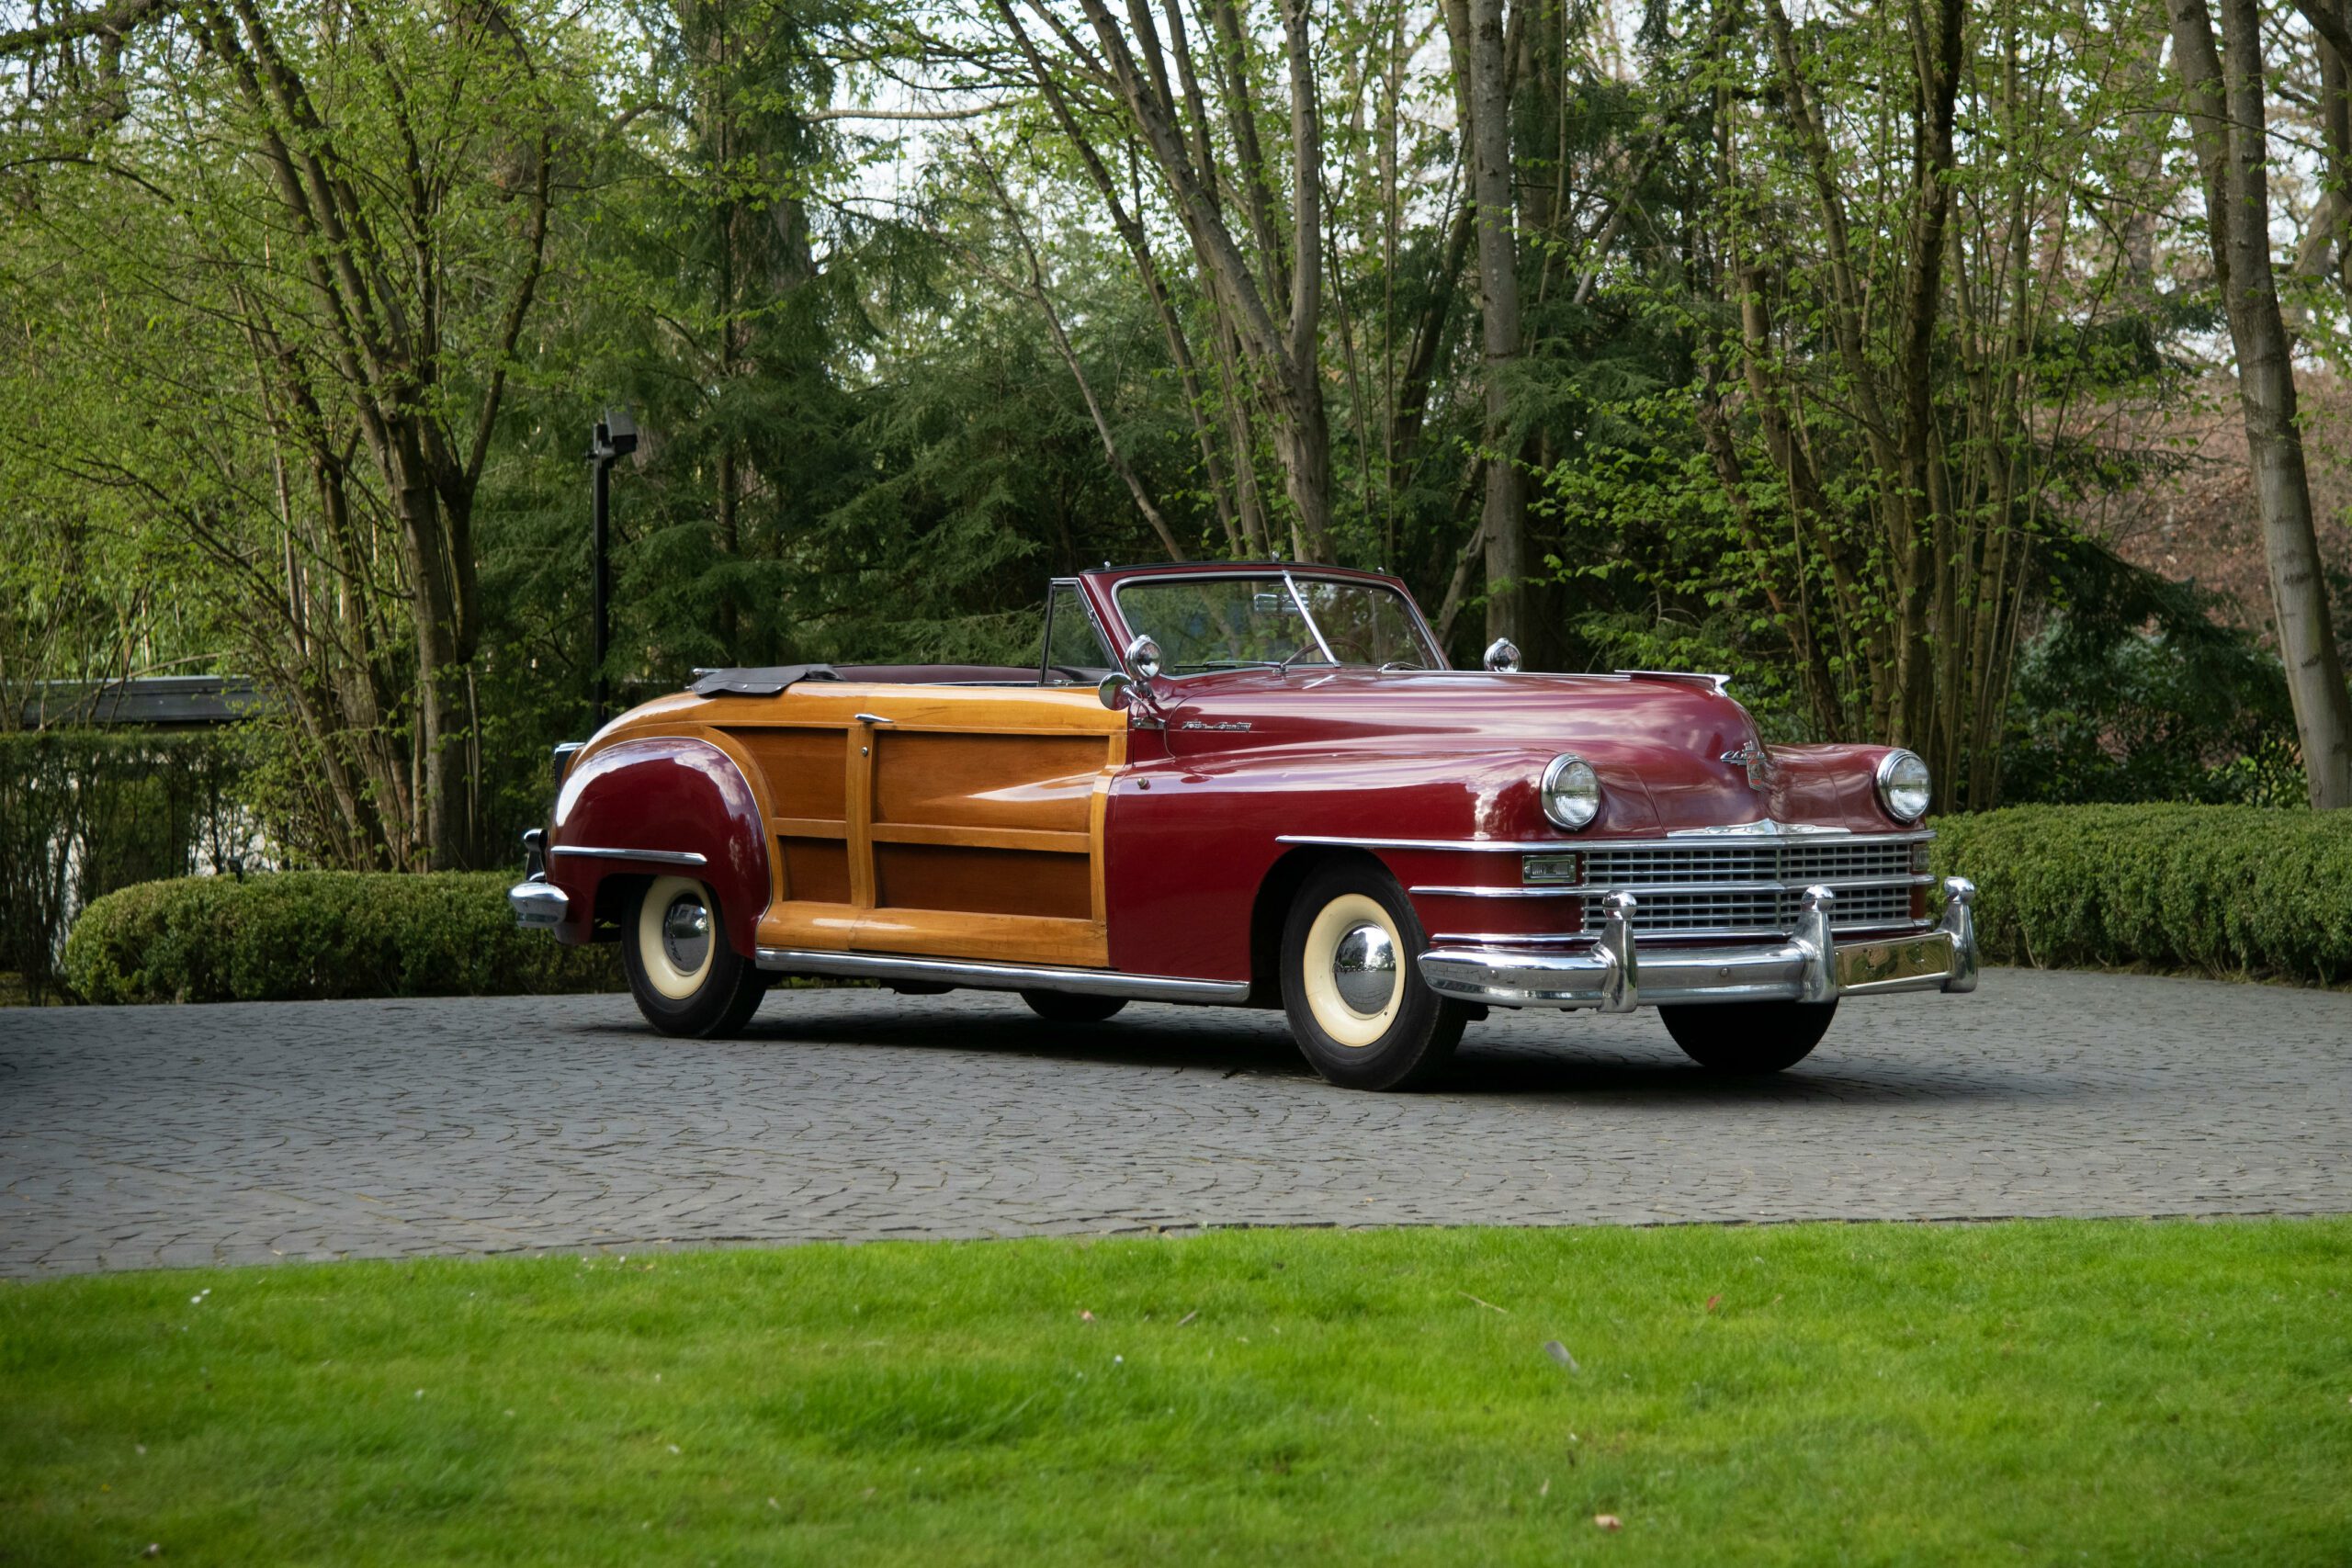 1946 Chrysler New Yorker ‘Town & Country’ Woodie Convertible, 1946 Chrysler New Yorker 'Town & Country' Woodie Convertible, Chrysler, Chrysler New Yorker